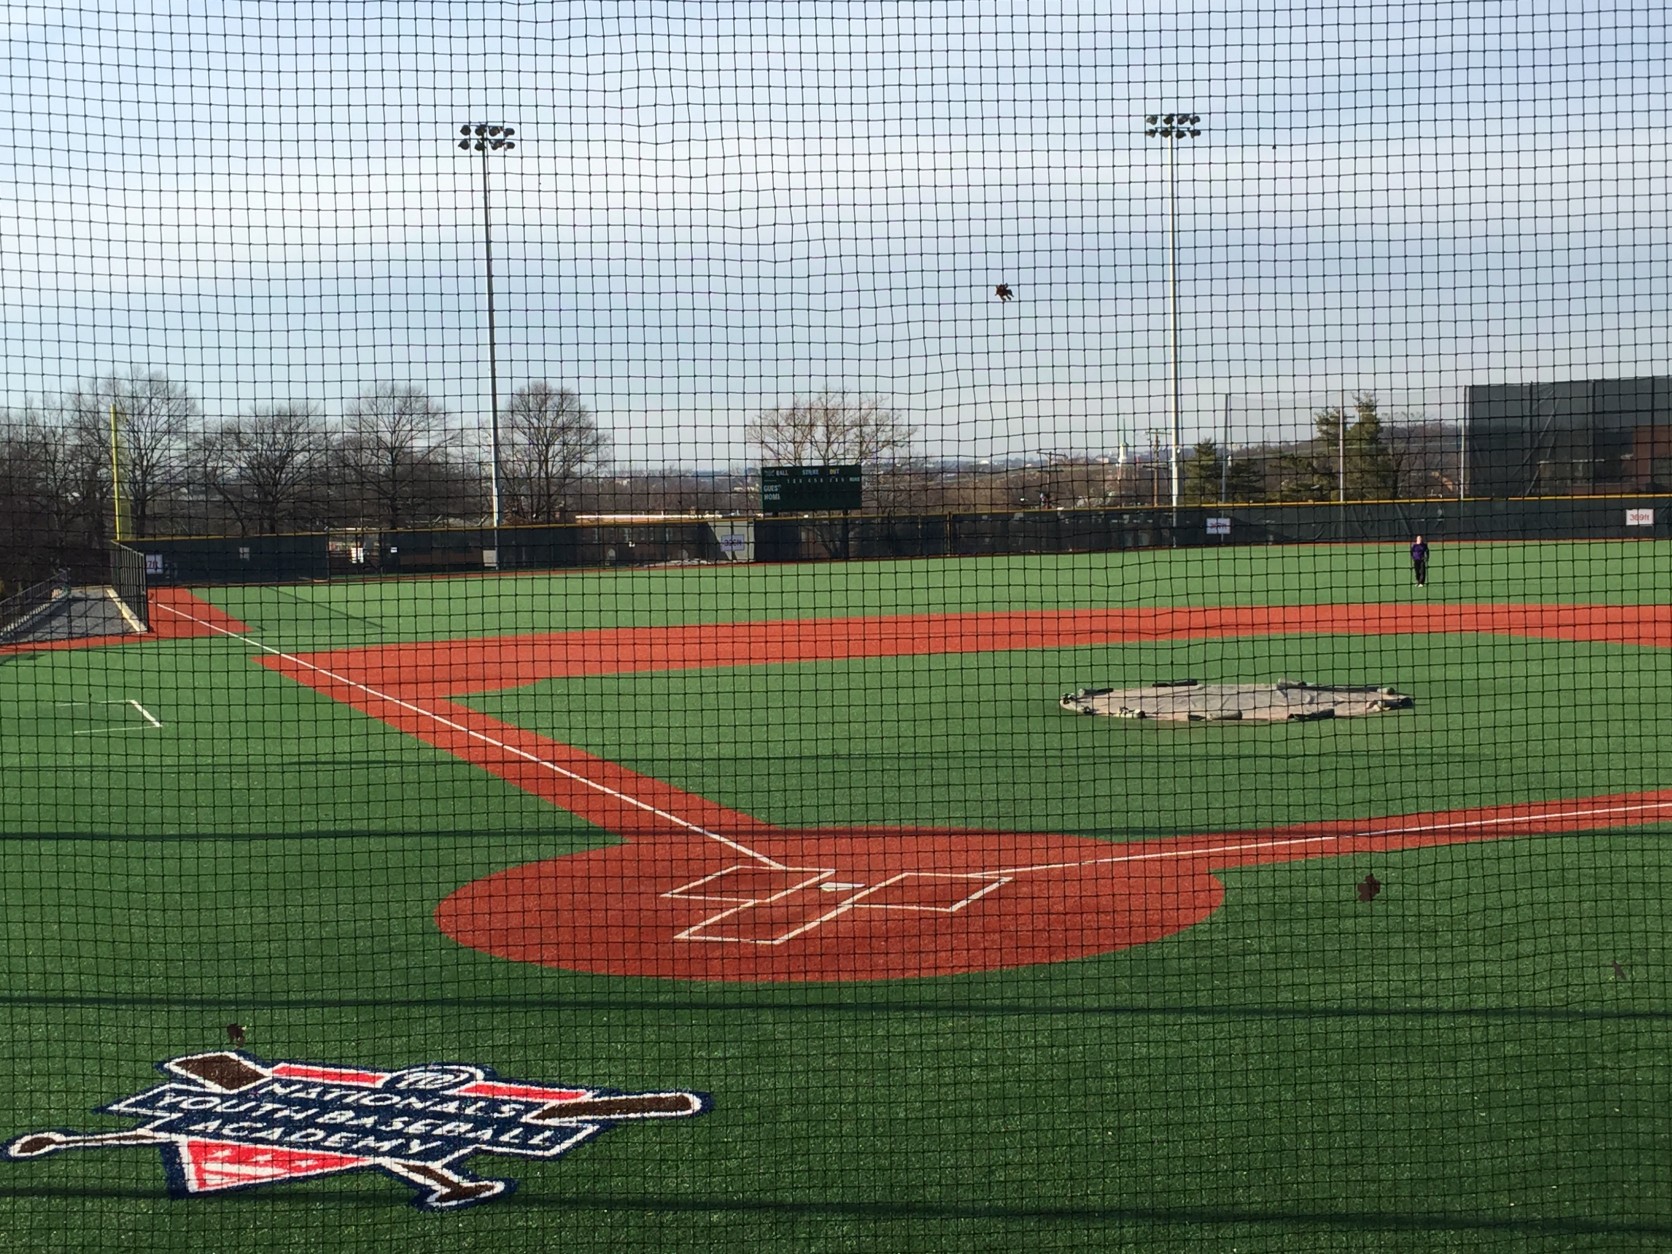 With field turf, the fields can handle lots of play and all the weather elements.  (WTOP/Andrew Mollenbeck)